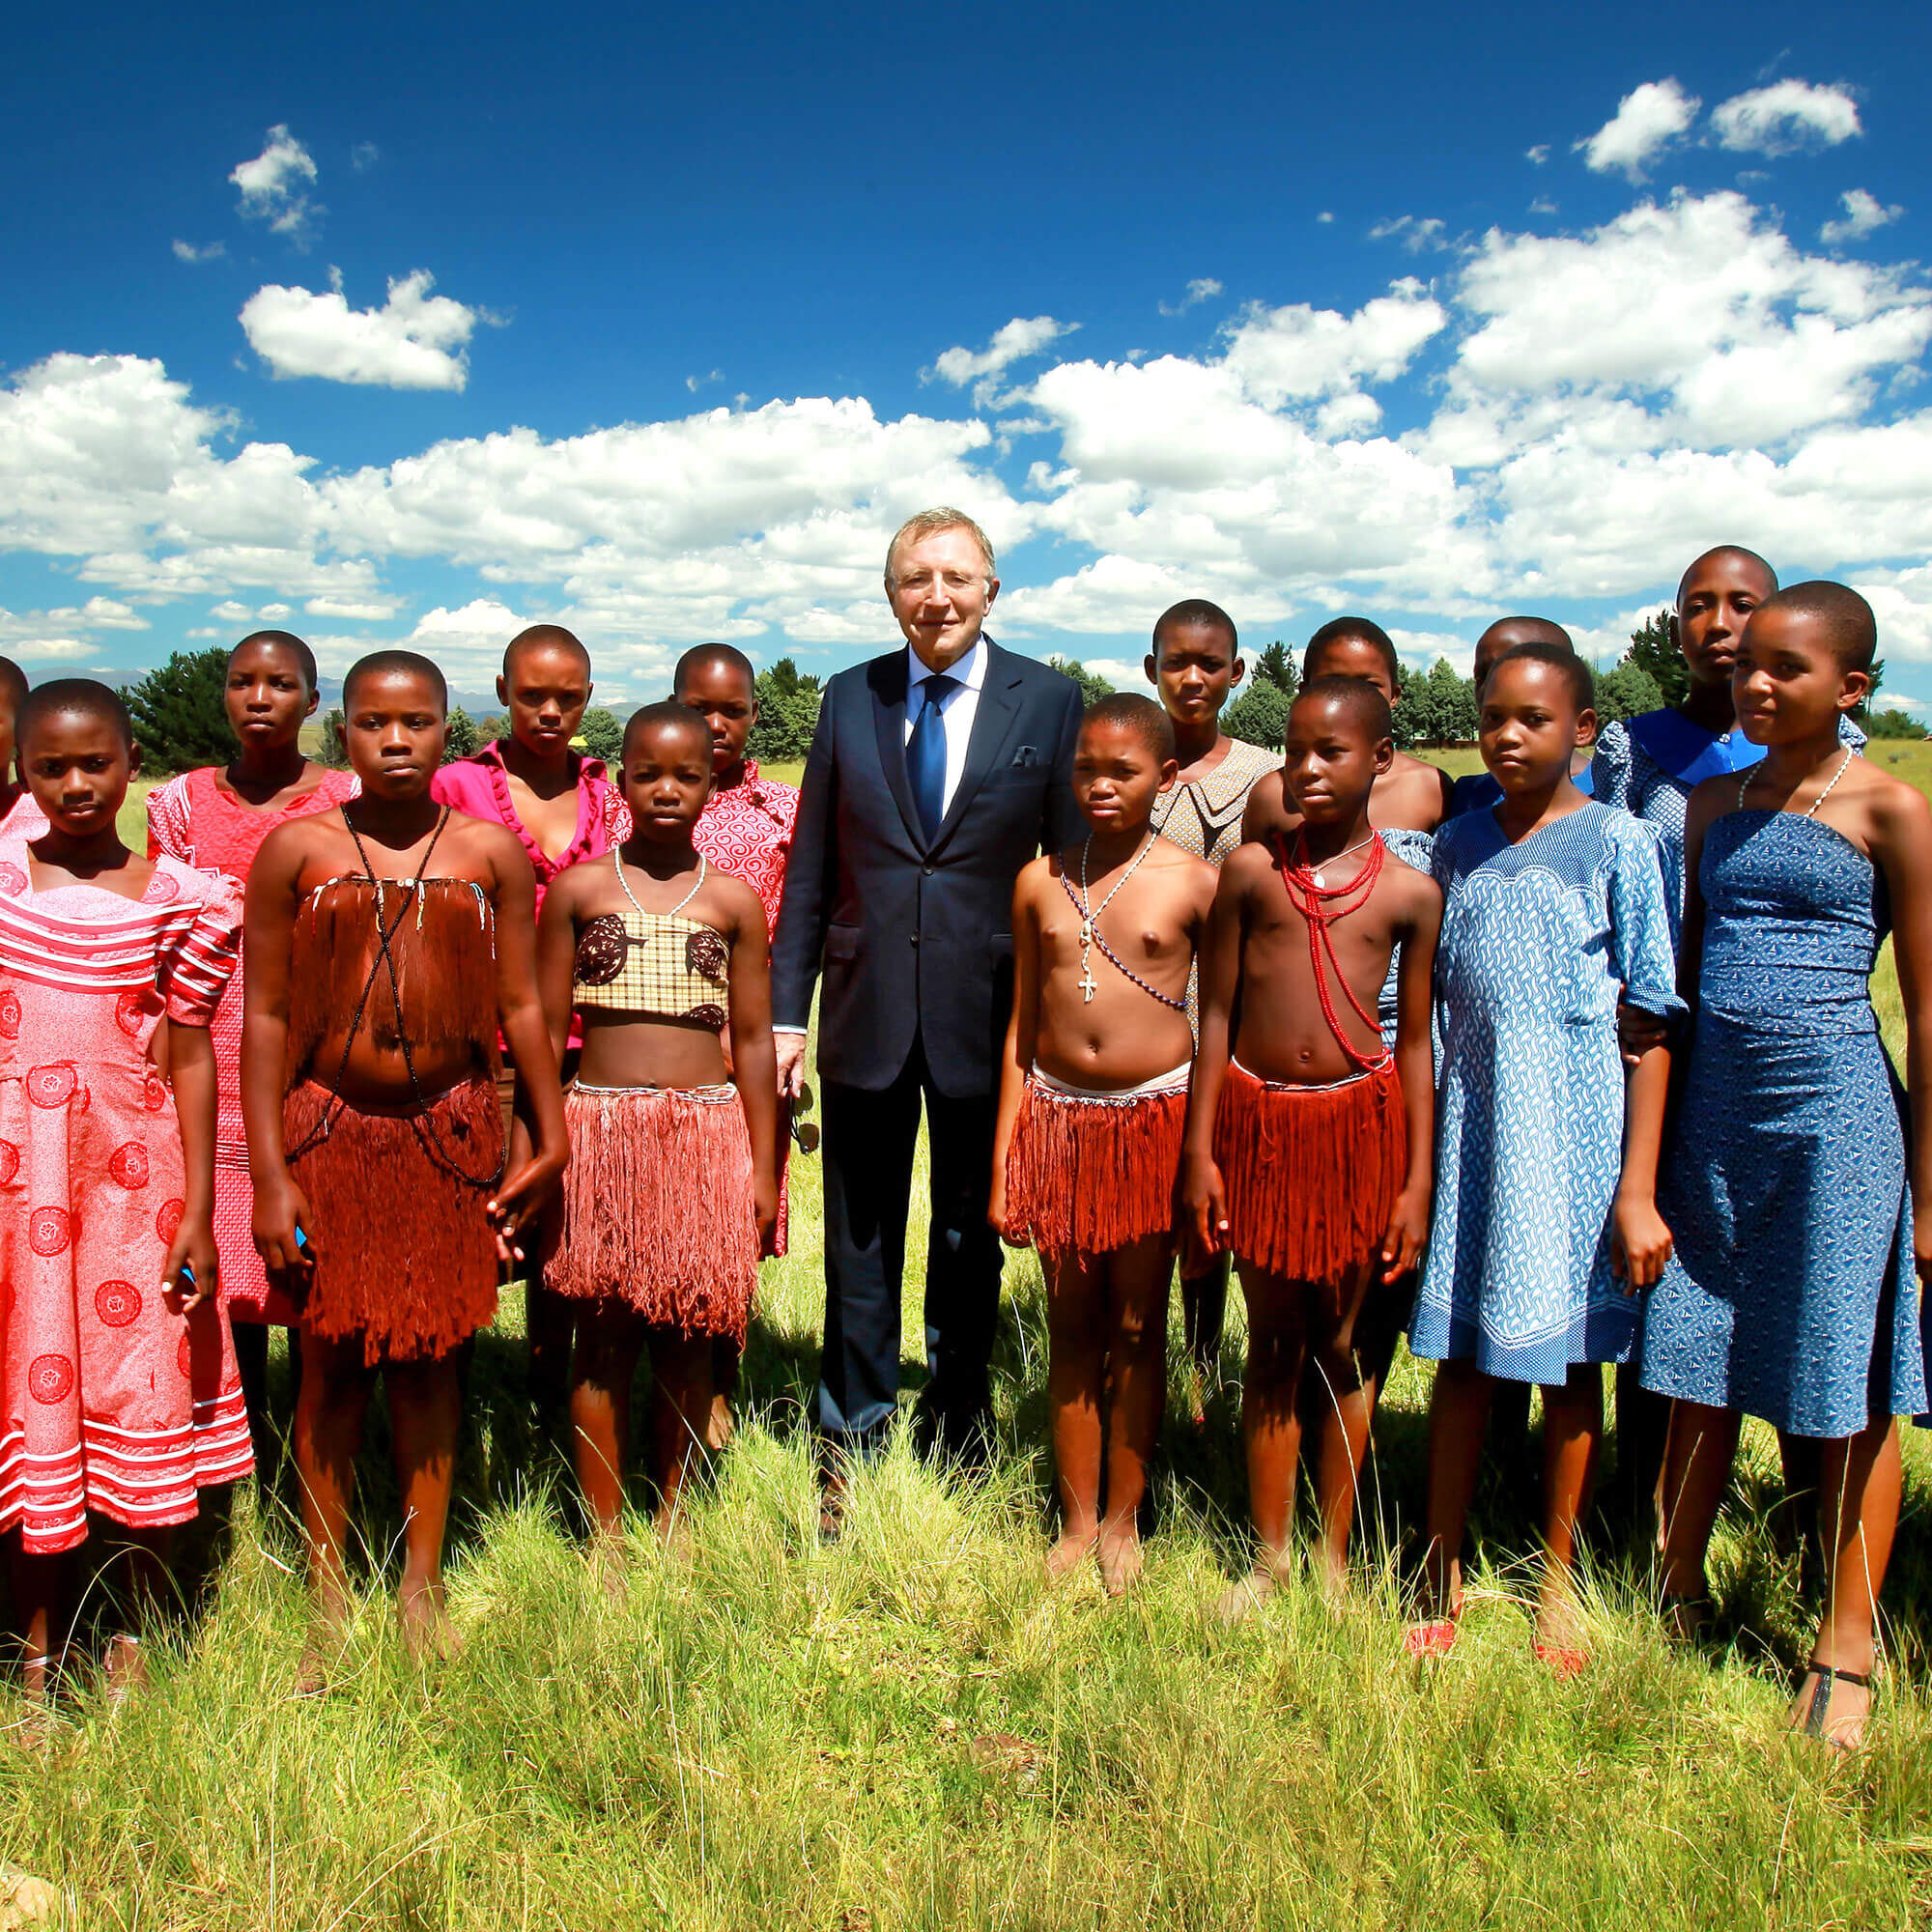 Mr Laurence Graff and children in South Africa